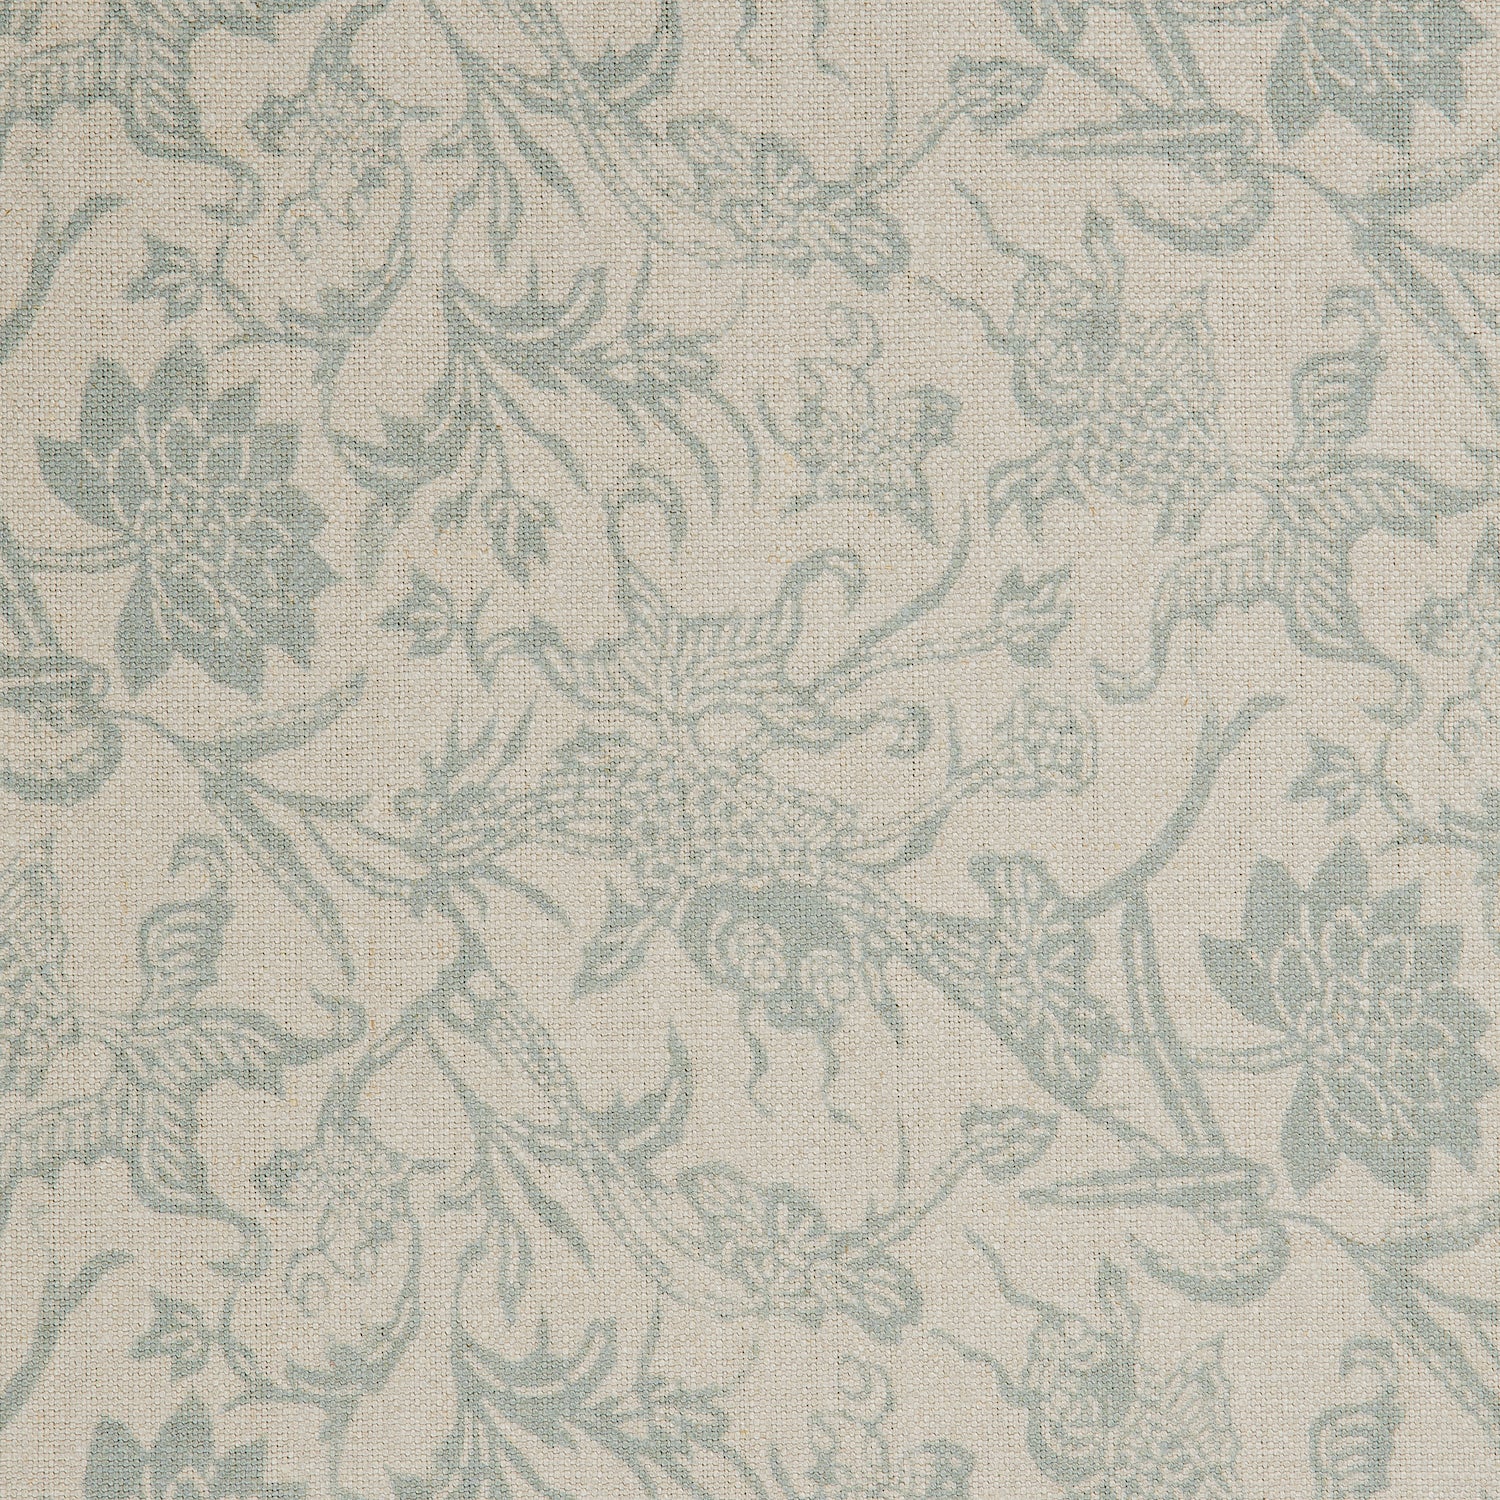 Detail of a linen fabric in a carp and leaf pattern in misty blue on a beige field.